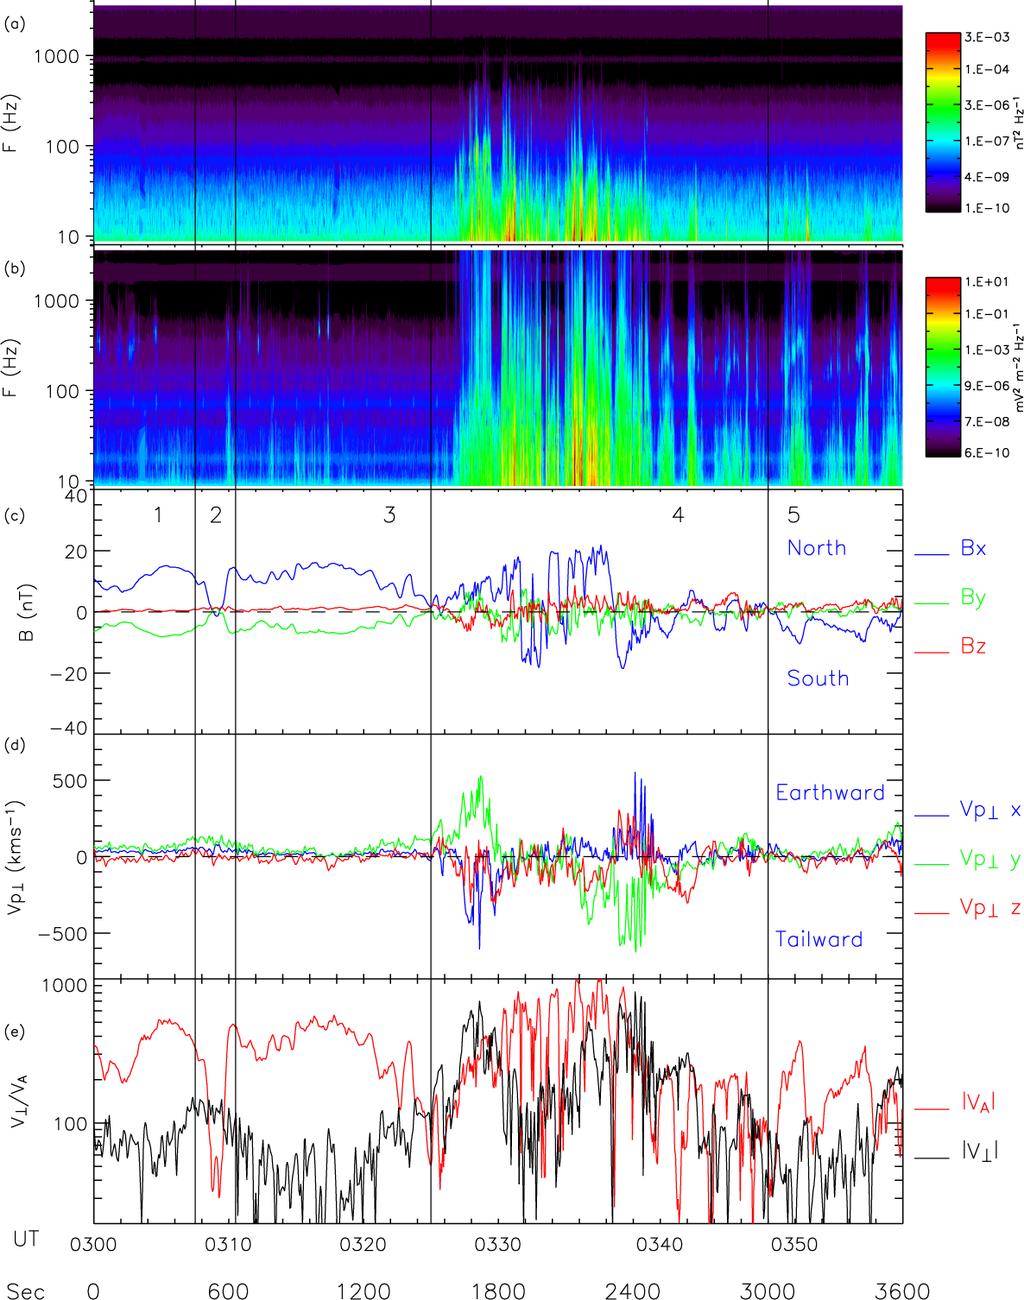 Figure 1. Summary of observations made by the Cluster 1 spacecraft in the interval 03:00 04:00 UT on 11 October 2001. (a) STAFF magnetic field spectra. (b) STAFF electric field spectra.